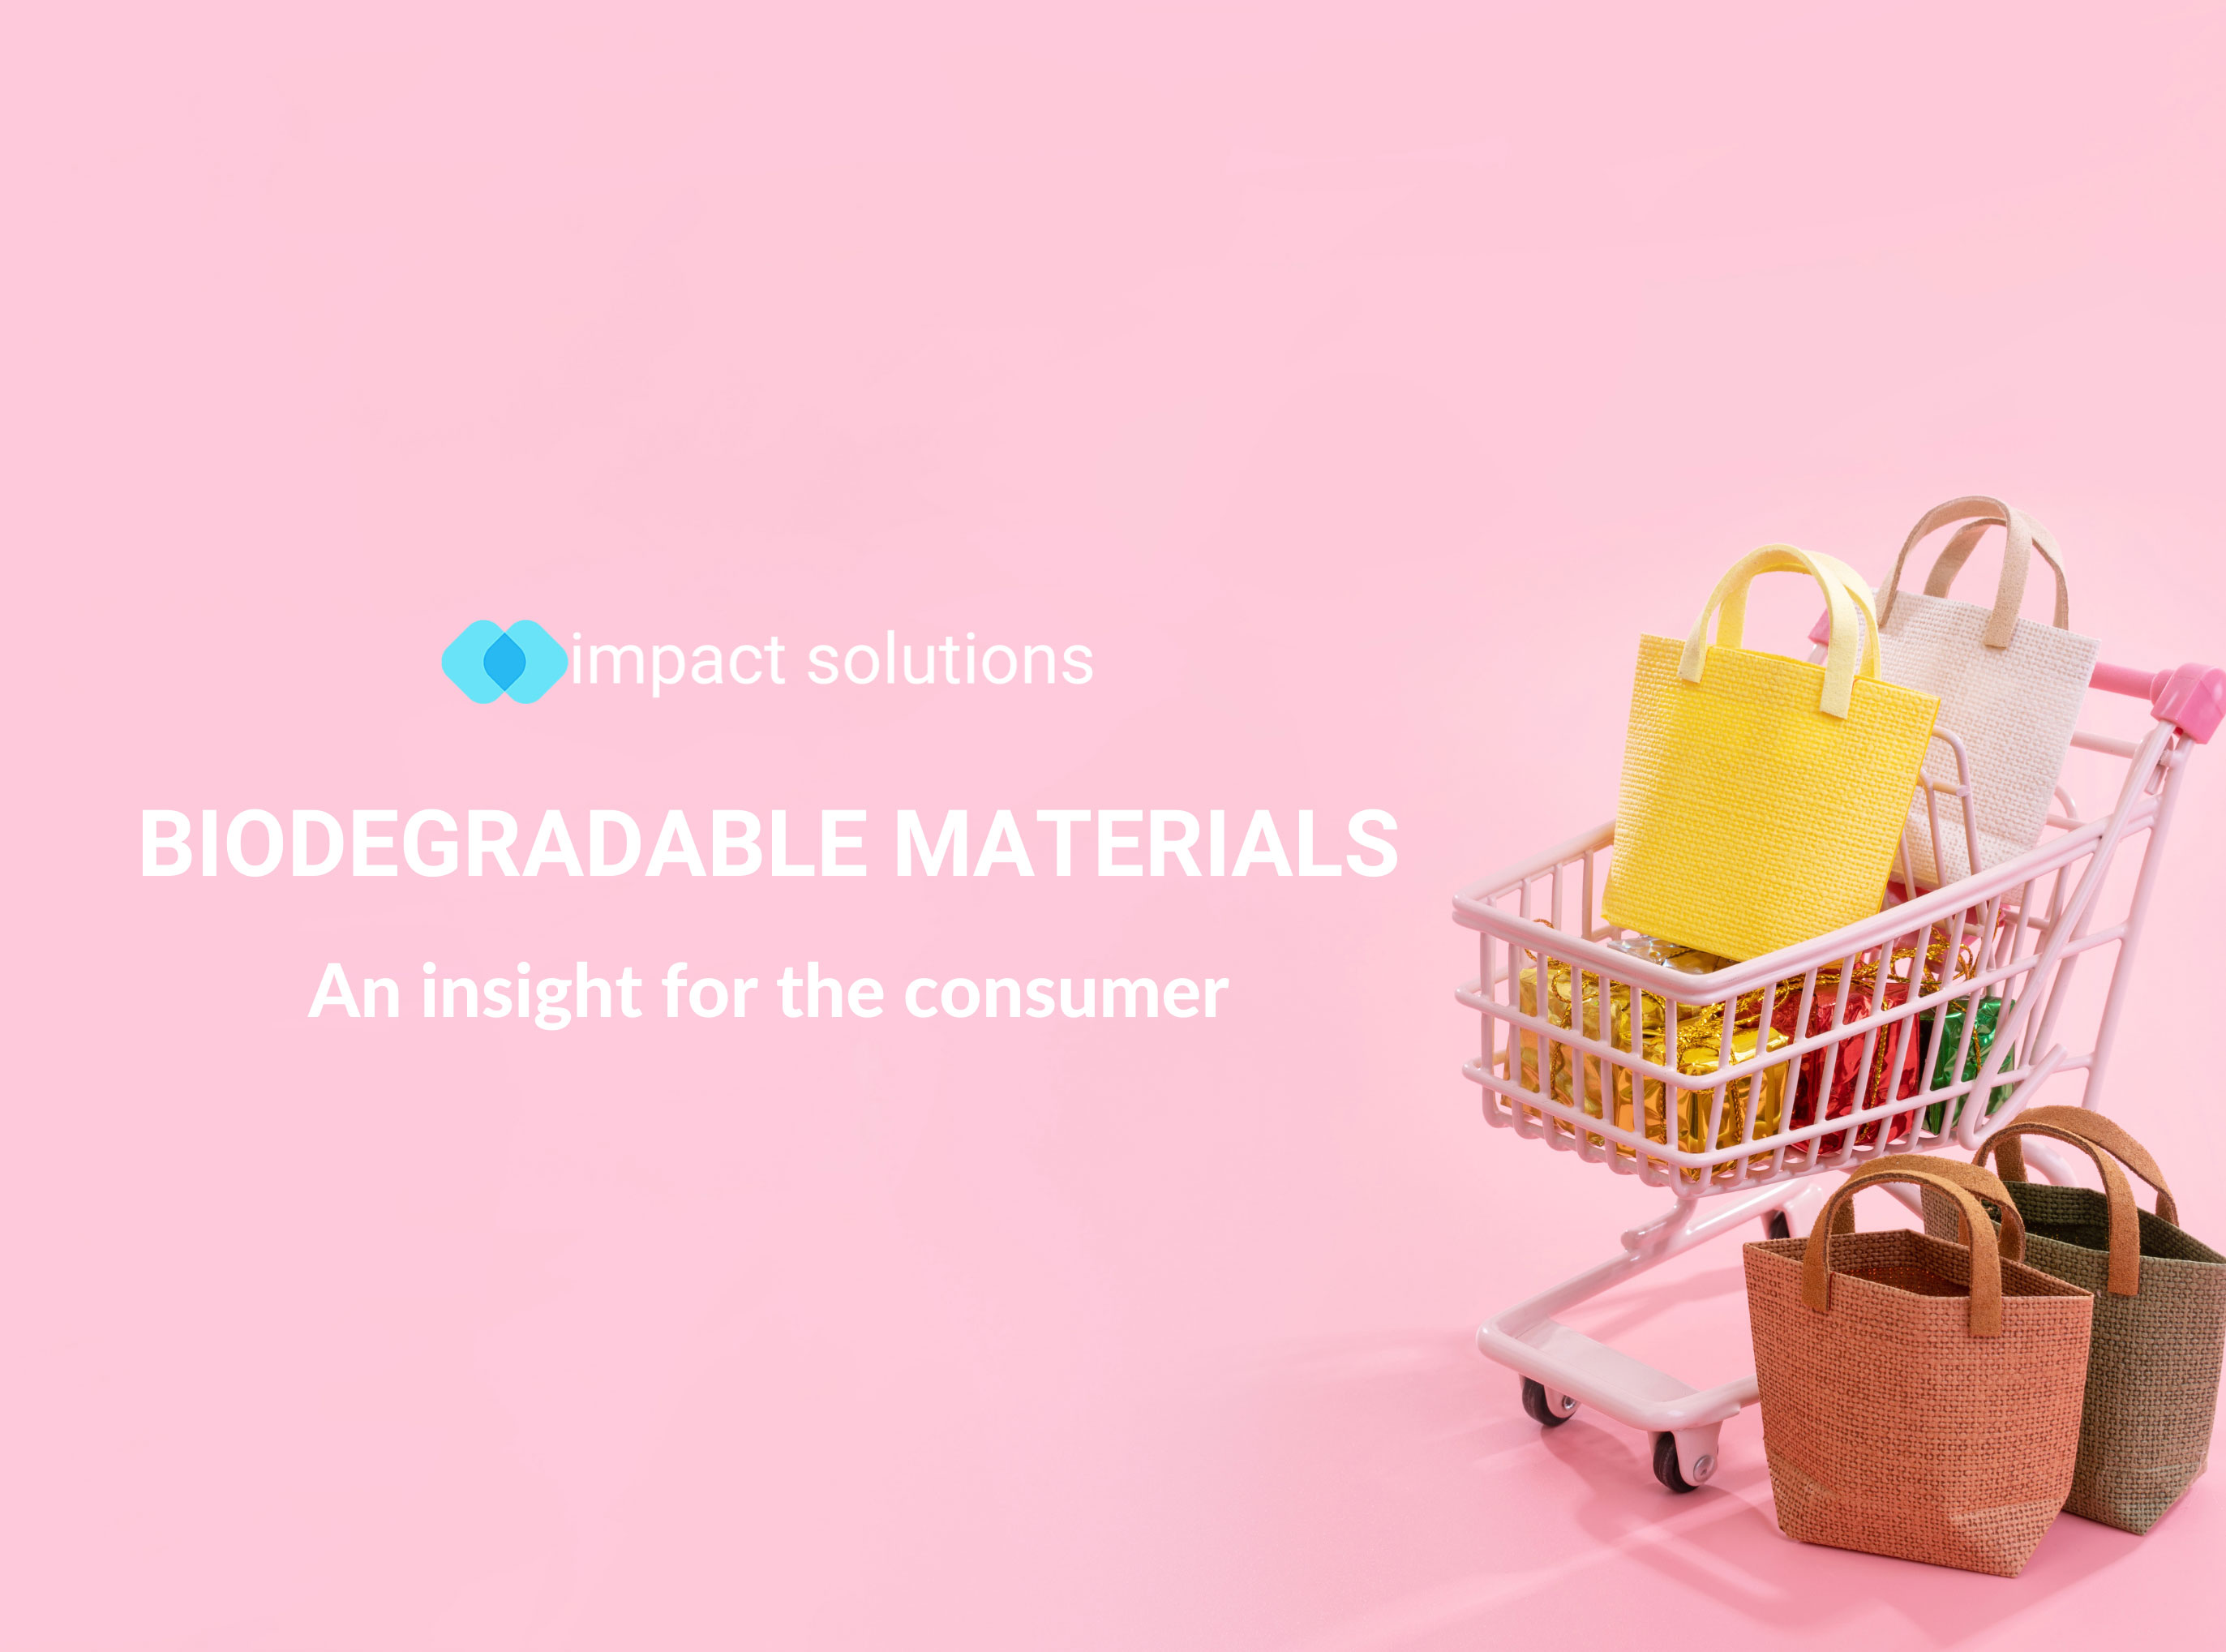 BIODEGRADABLE MATERIALS: AN INSIGHT FOR THE CONSUMER